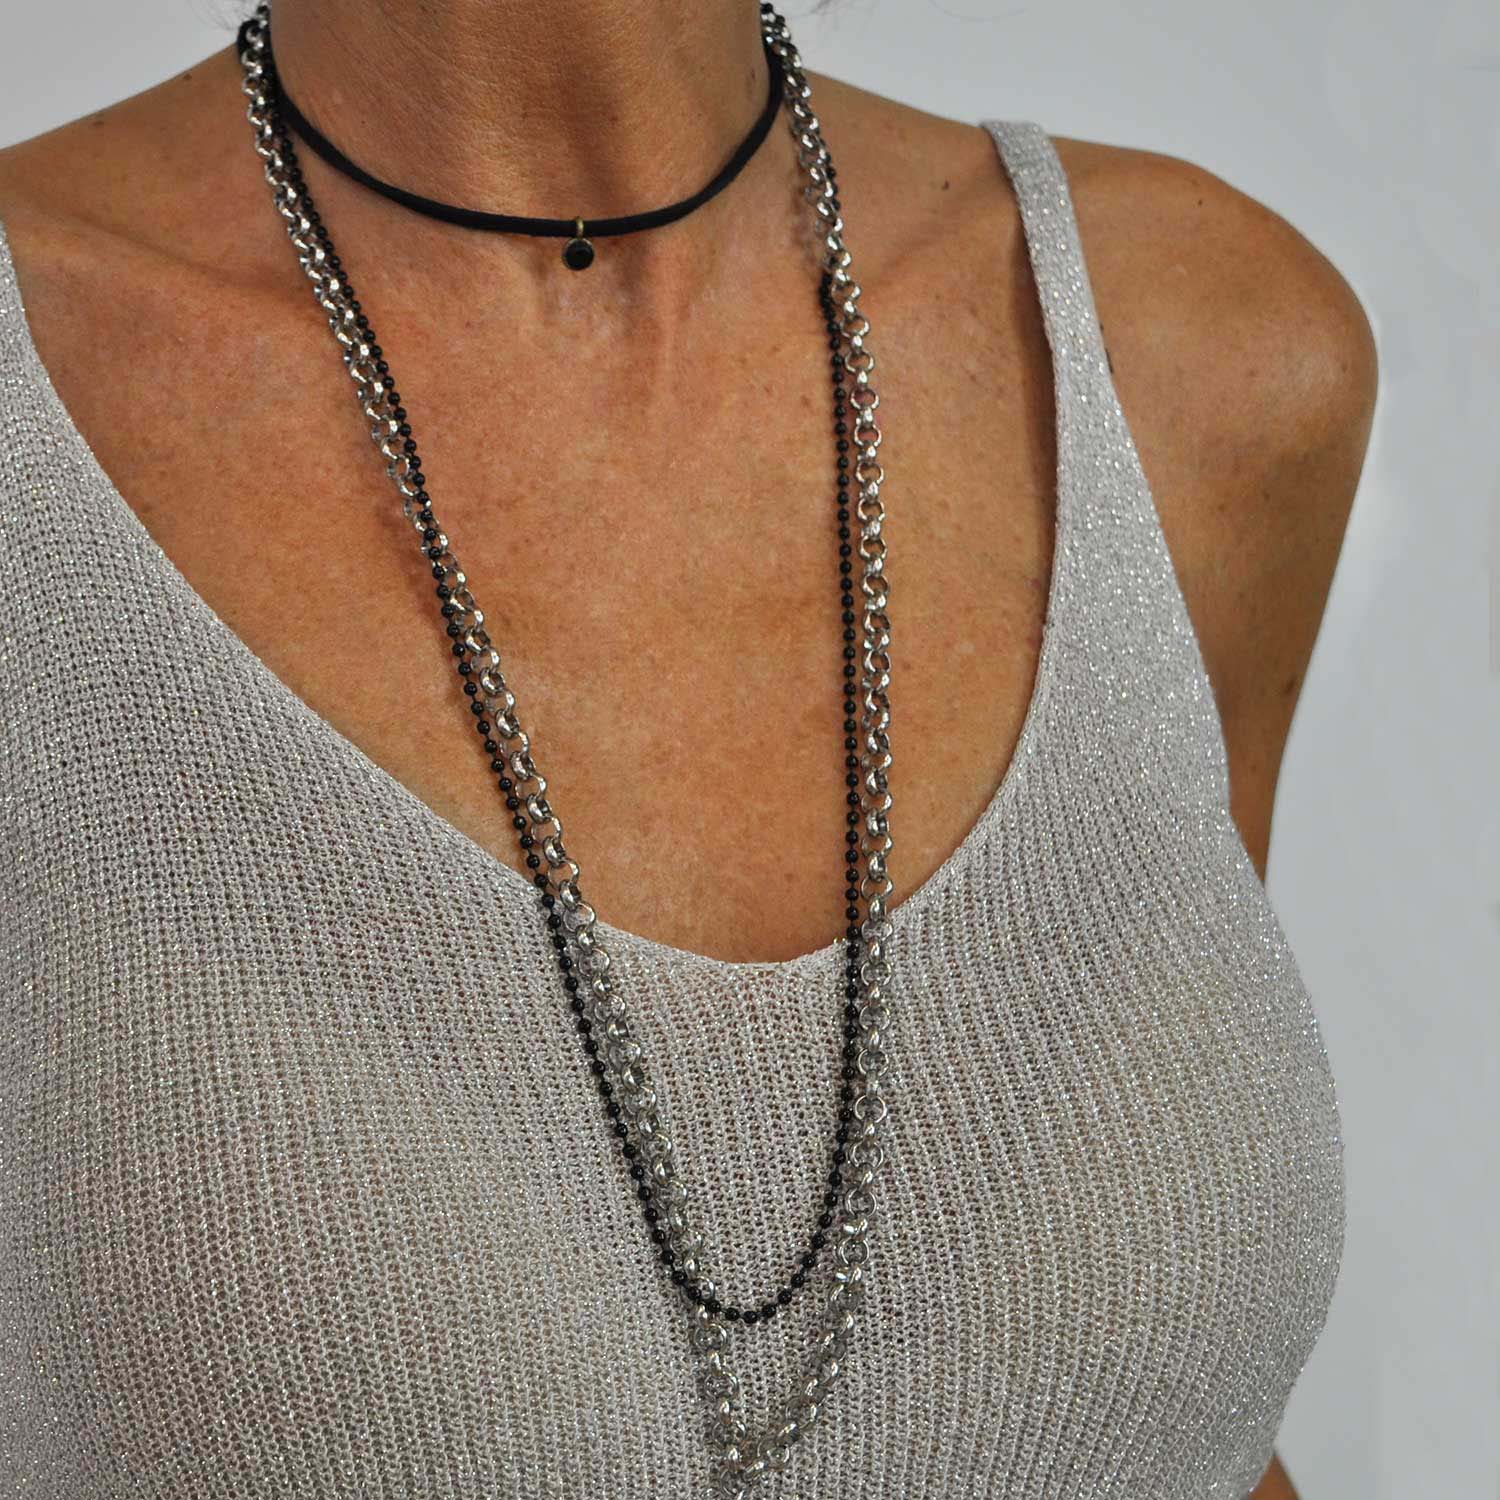 Black beaded chains
